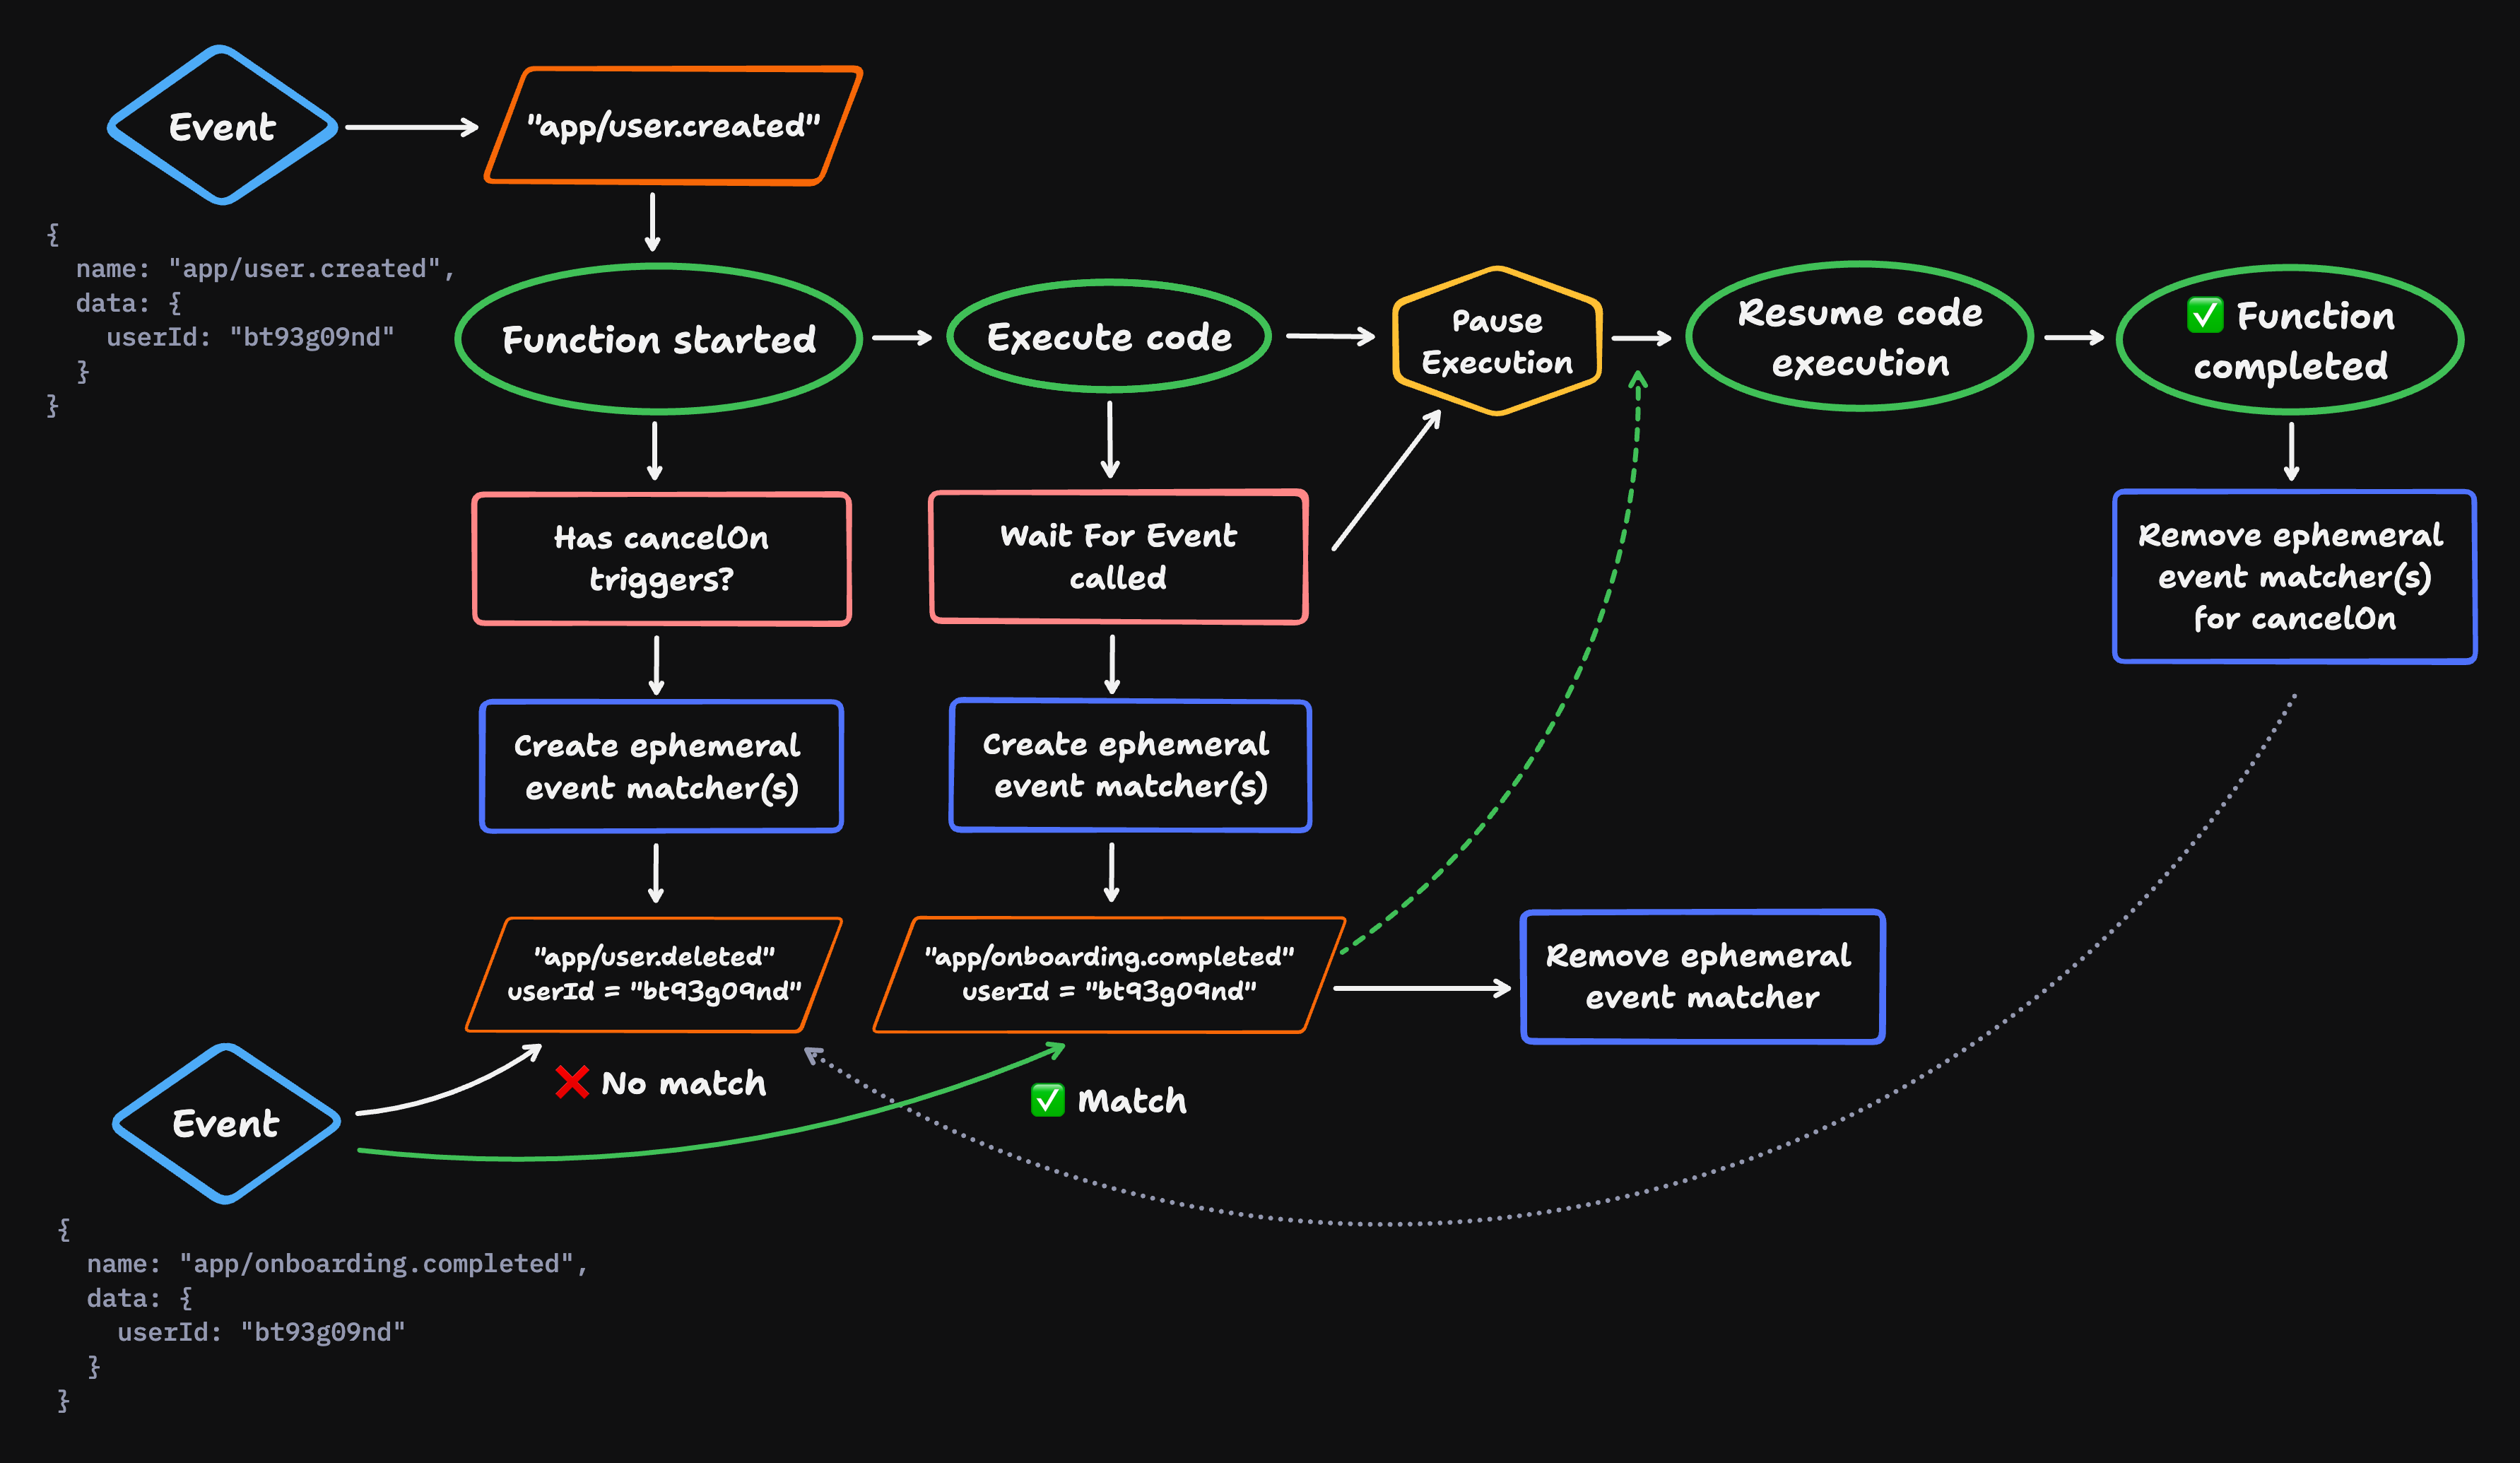 Flowchart depicting the process of handling event-driven functions in Inngest. An 'app/user.created' event occurs with data containing userId. The function is started and the code is executed. If the function has cancelOn triggers, ephemeral event matchers are created for 'app/user.deleted' with userId. If the function calls Wait For Event, ephemeral event matchers are created for 'app/onboarding.completed' with userId. The function execution is paused. An 'app/onboarding.completed' event occurs with data containing userId. The event matches the ephemeral matcher, so the matcher is removed, and the function execution resumes. The function completes, and any remaining ephemeral matchers for cancelOn are removed. The chart includes two conditions for events: 'app/user.deleted' with no match, indicated by a red cross, and 'app/onboarding.completed' with a match, indicated by a green check mark.